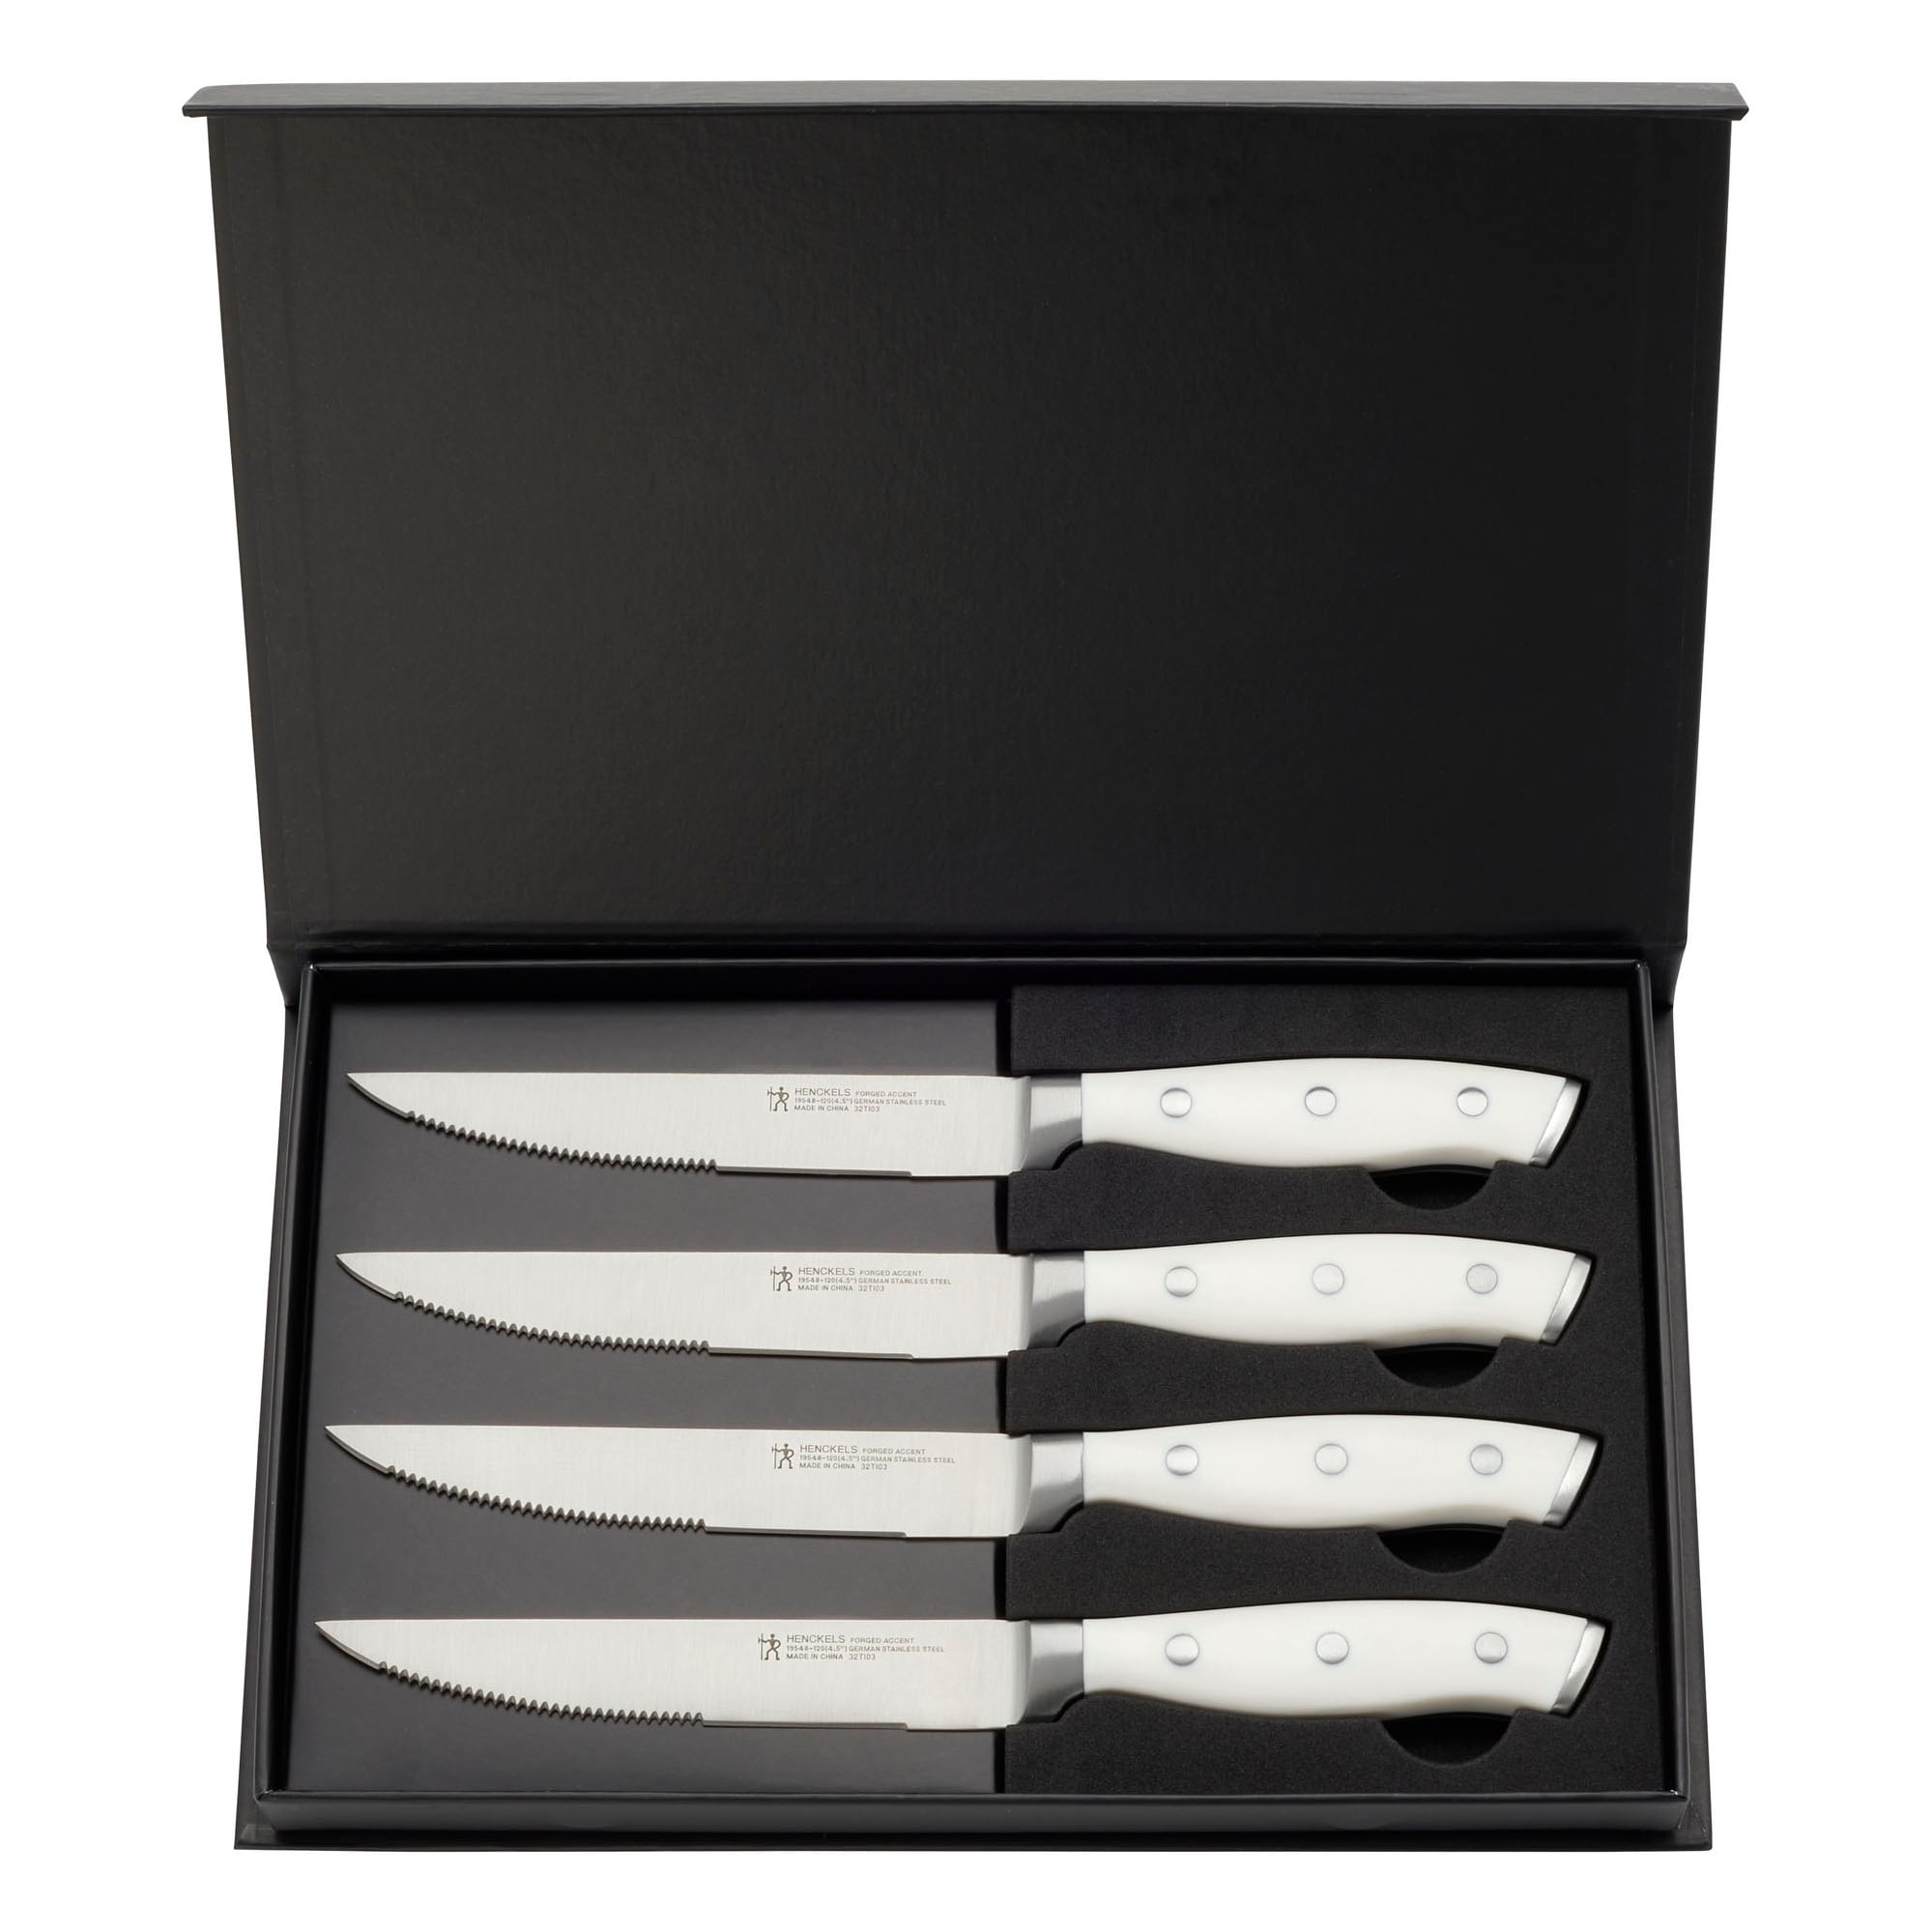 https://ak1.ostkcdn.com/images/products/is/images/direct/cfb7222847aa3ed3fad6b815e9644e2b09332a83/HENCKELS-Forged-Accent-4-pc-Steak-Knife-Set.jpg